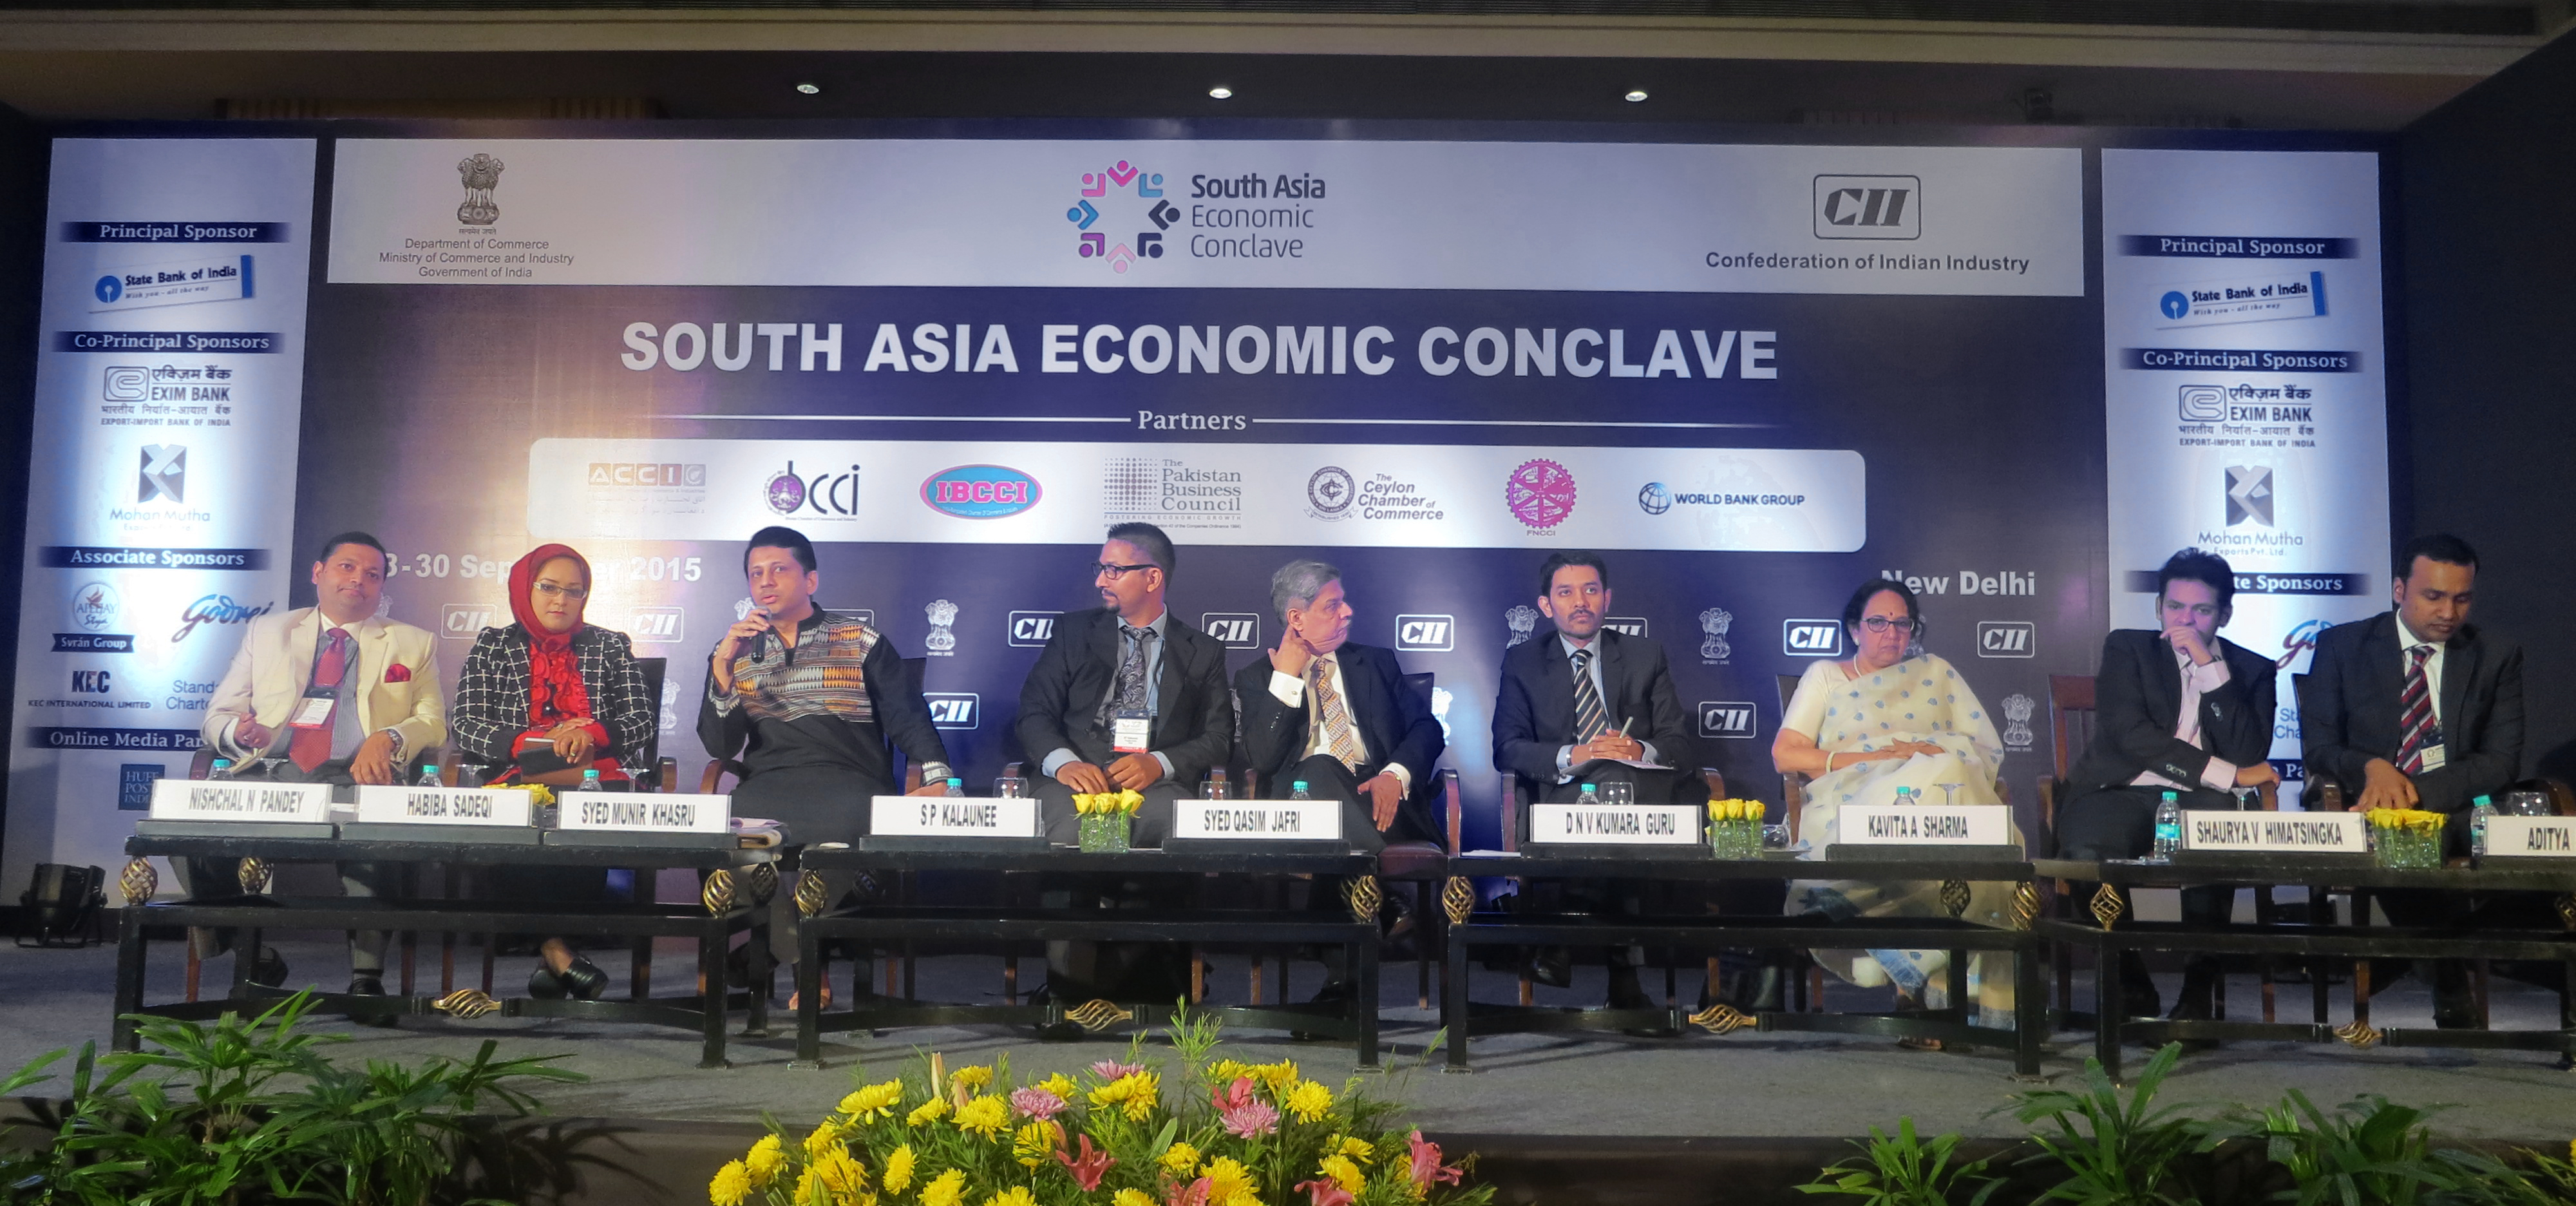 The South Asia Economic Conclave, September 28-30, 2015